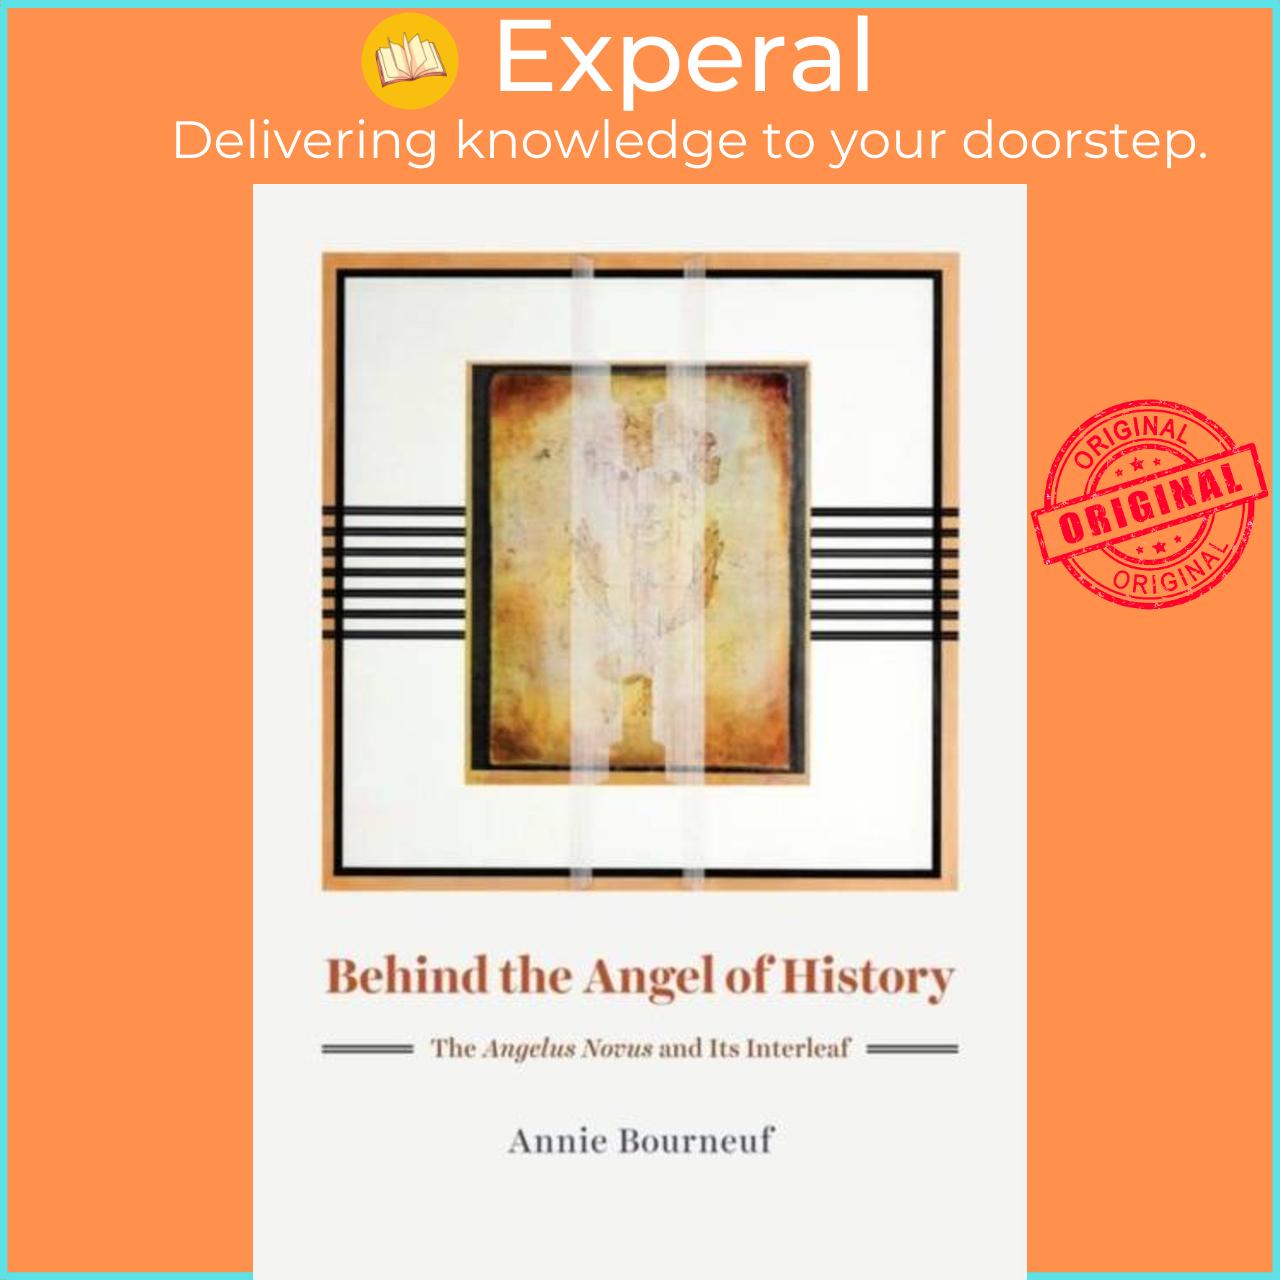 Sách - Behind the Angel of History - The "Angelus Novus" and Its Interleaf by Annie Bourneuf (UK edition, hardcover)